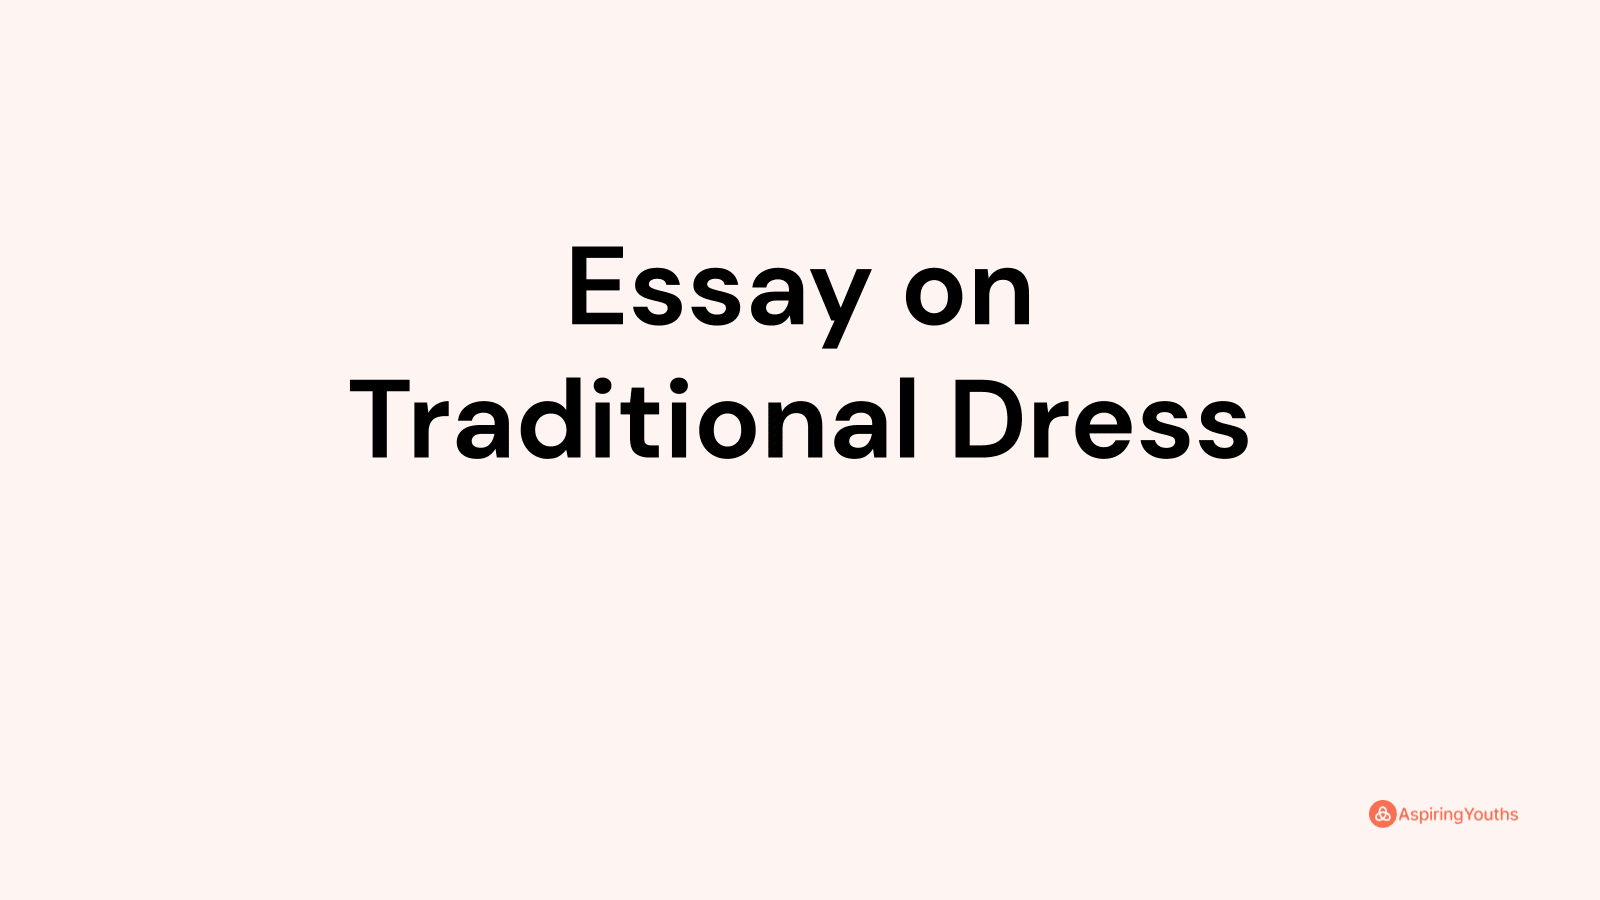 Essay on Traditional Dress